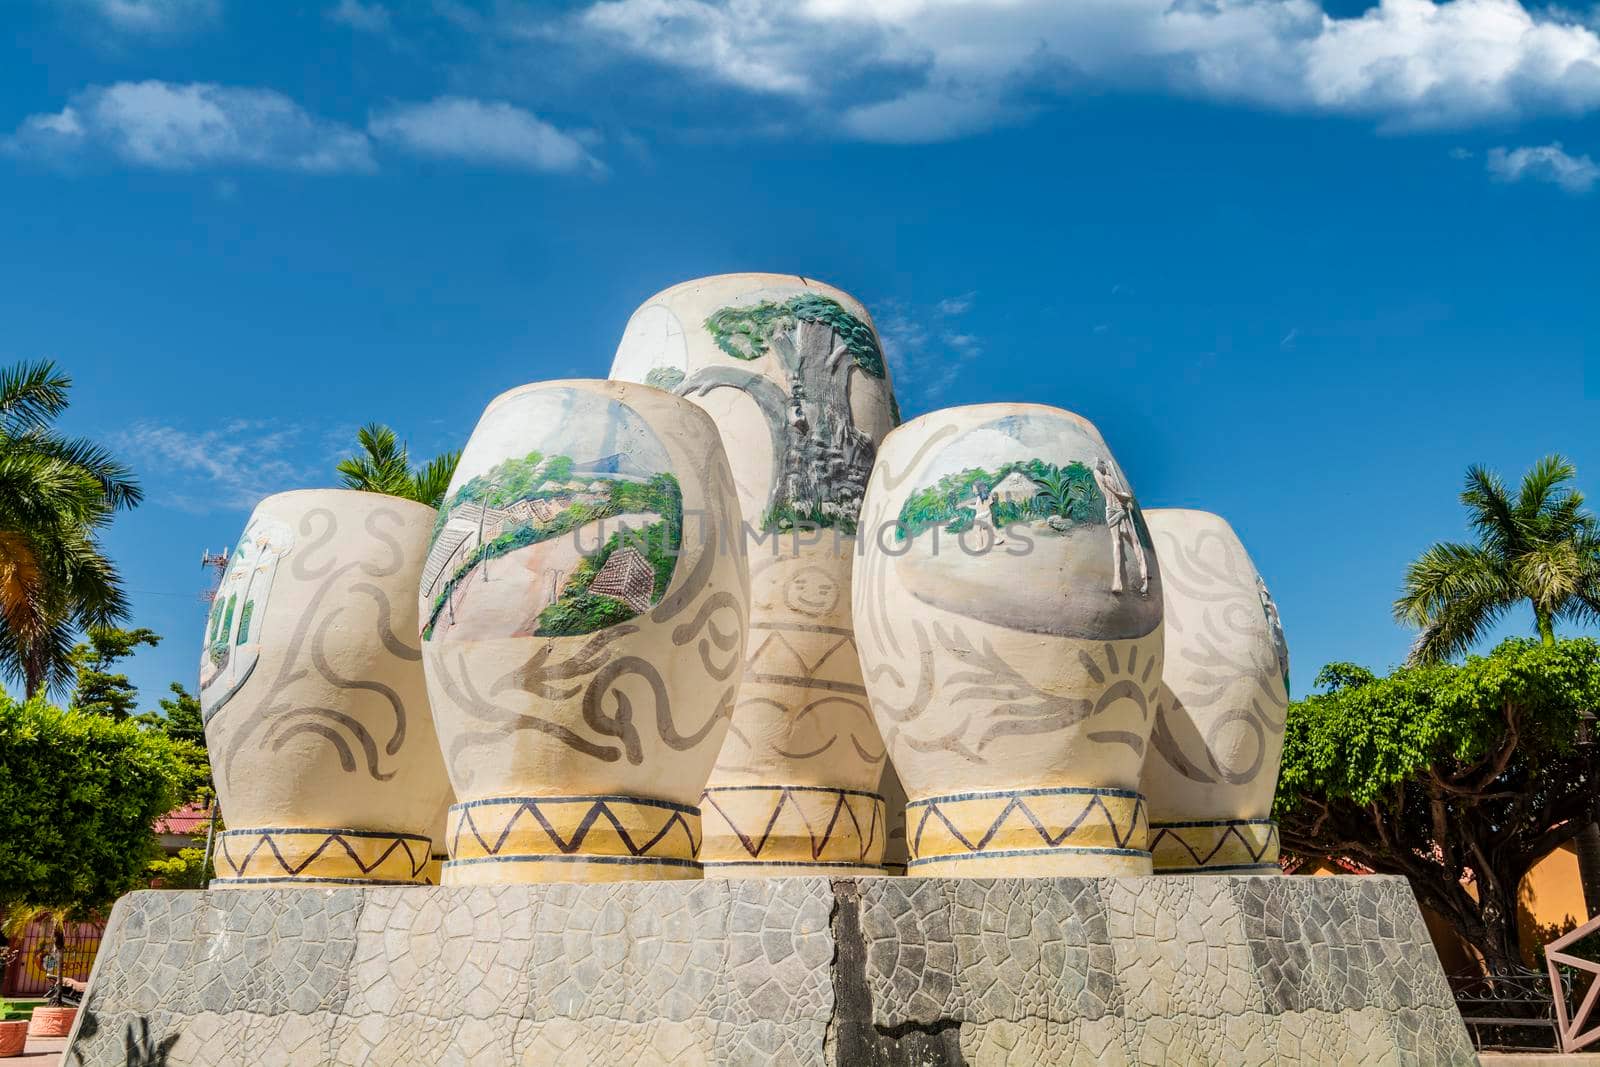 LAS JICARAS fountain in Nagarote park. Las Jicaras cultural fountain in Nagarote, Nicaragua. Cultural gourds in the middle of a fountain on a sunny day by isaiphoto